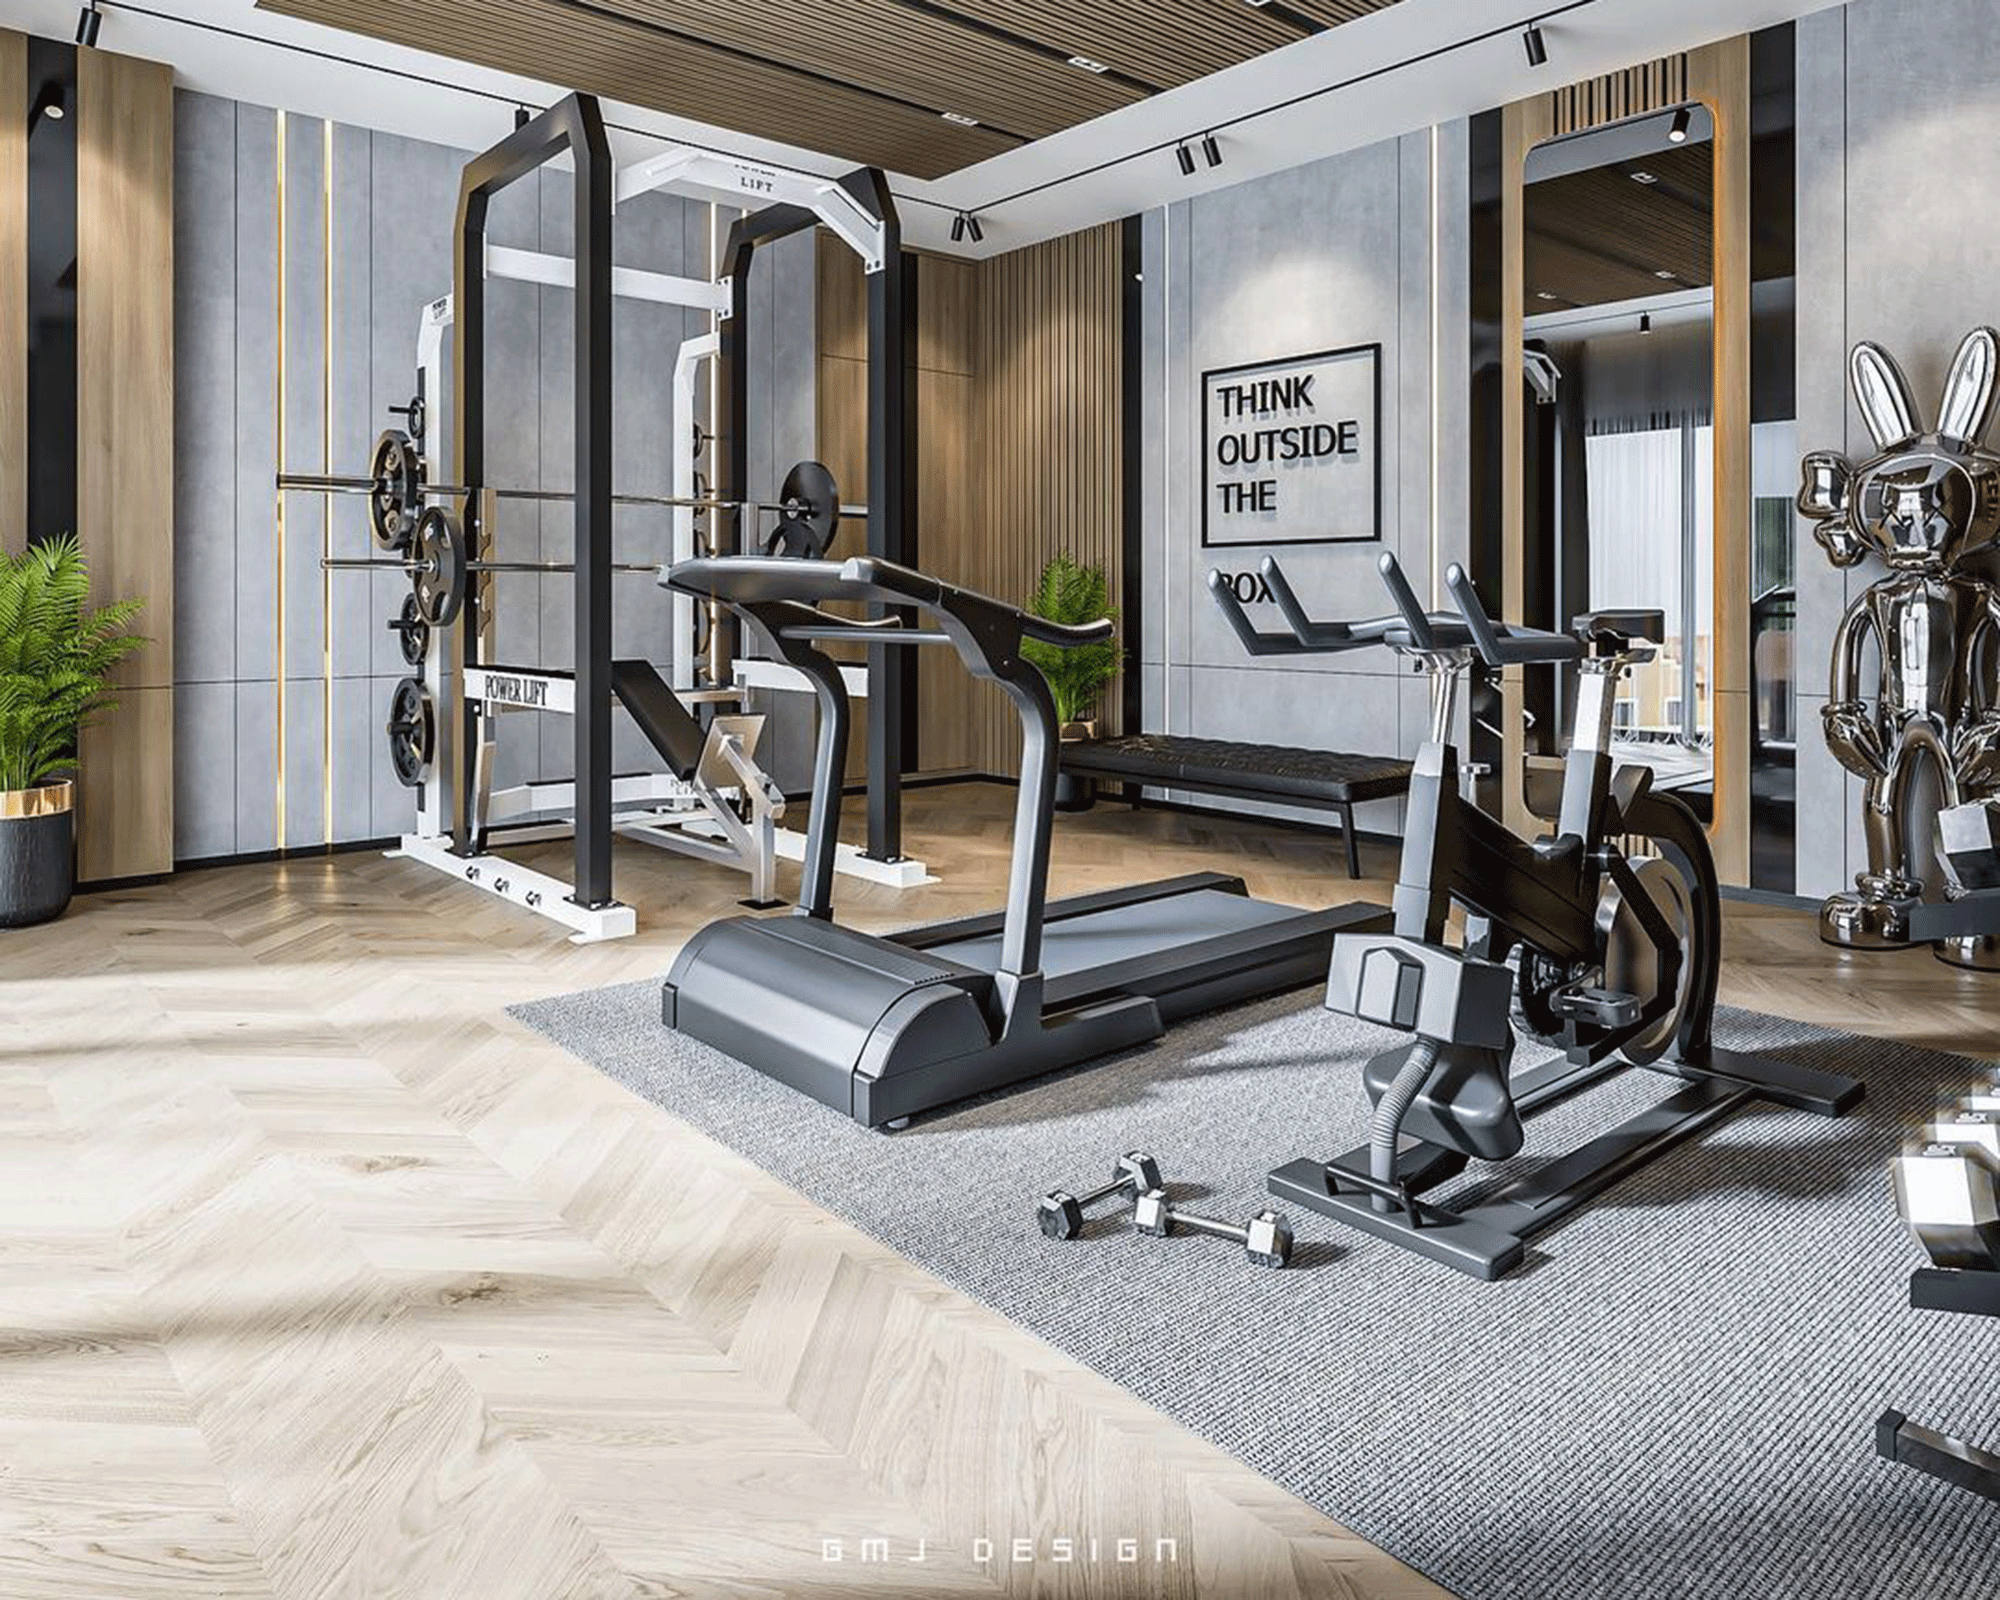 A home gym with treadmill, exercise bike, workout mirror and 'think outside the box' wall decor